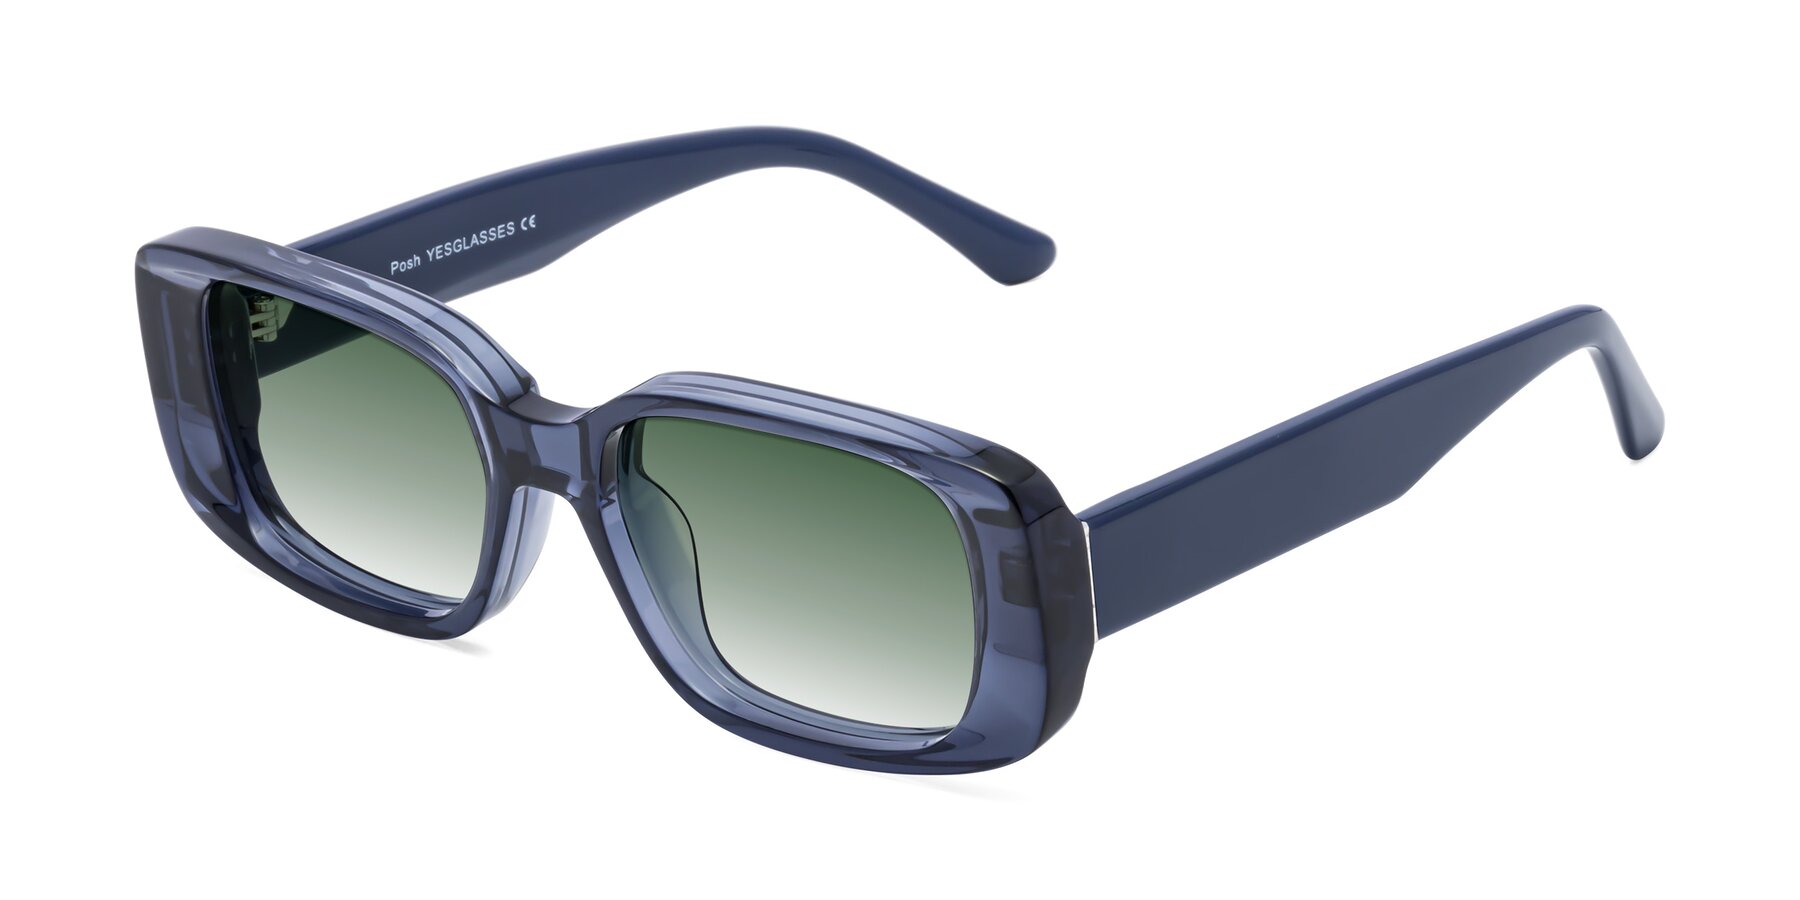 Angle of Posh in Translucent Blue with Green Gradient Lenses